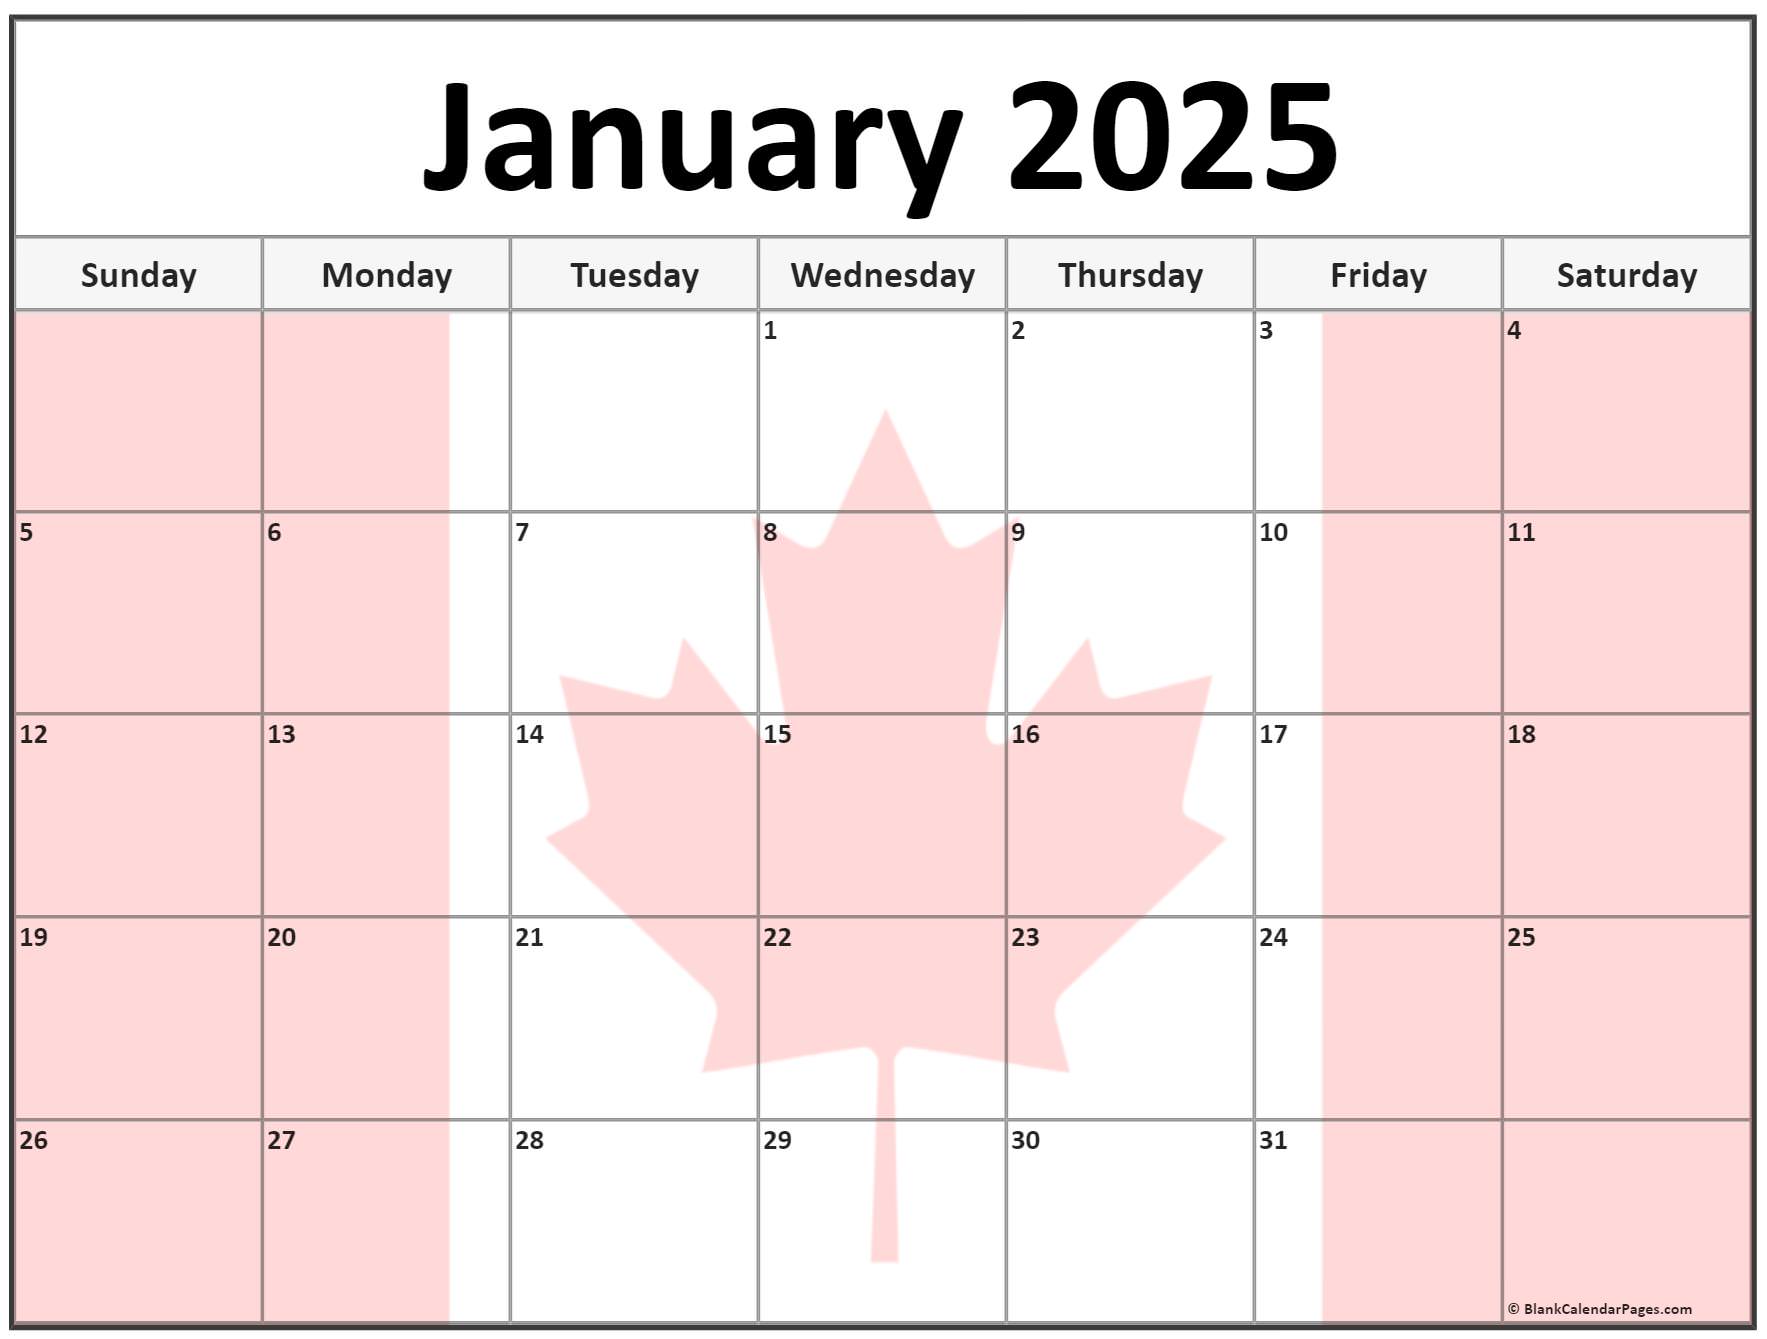 collection-of-january-2025-photo-calendars-with-image-filters